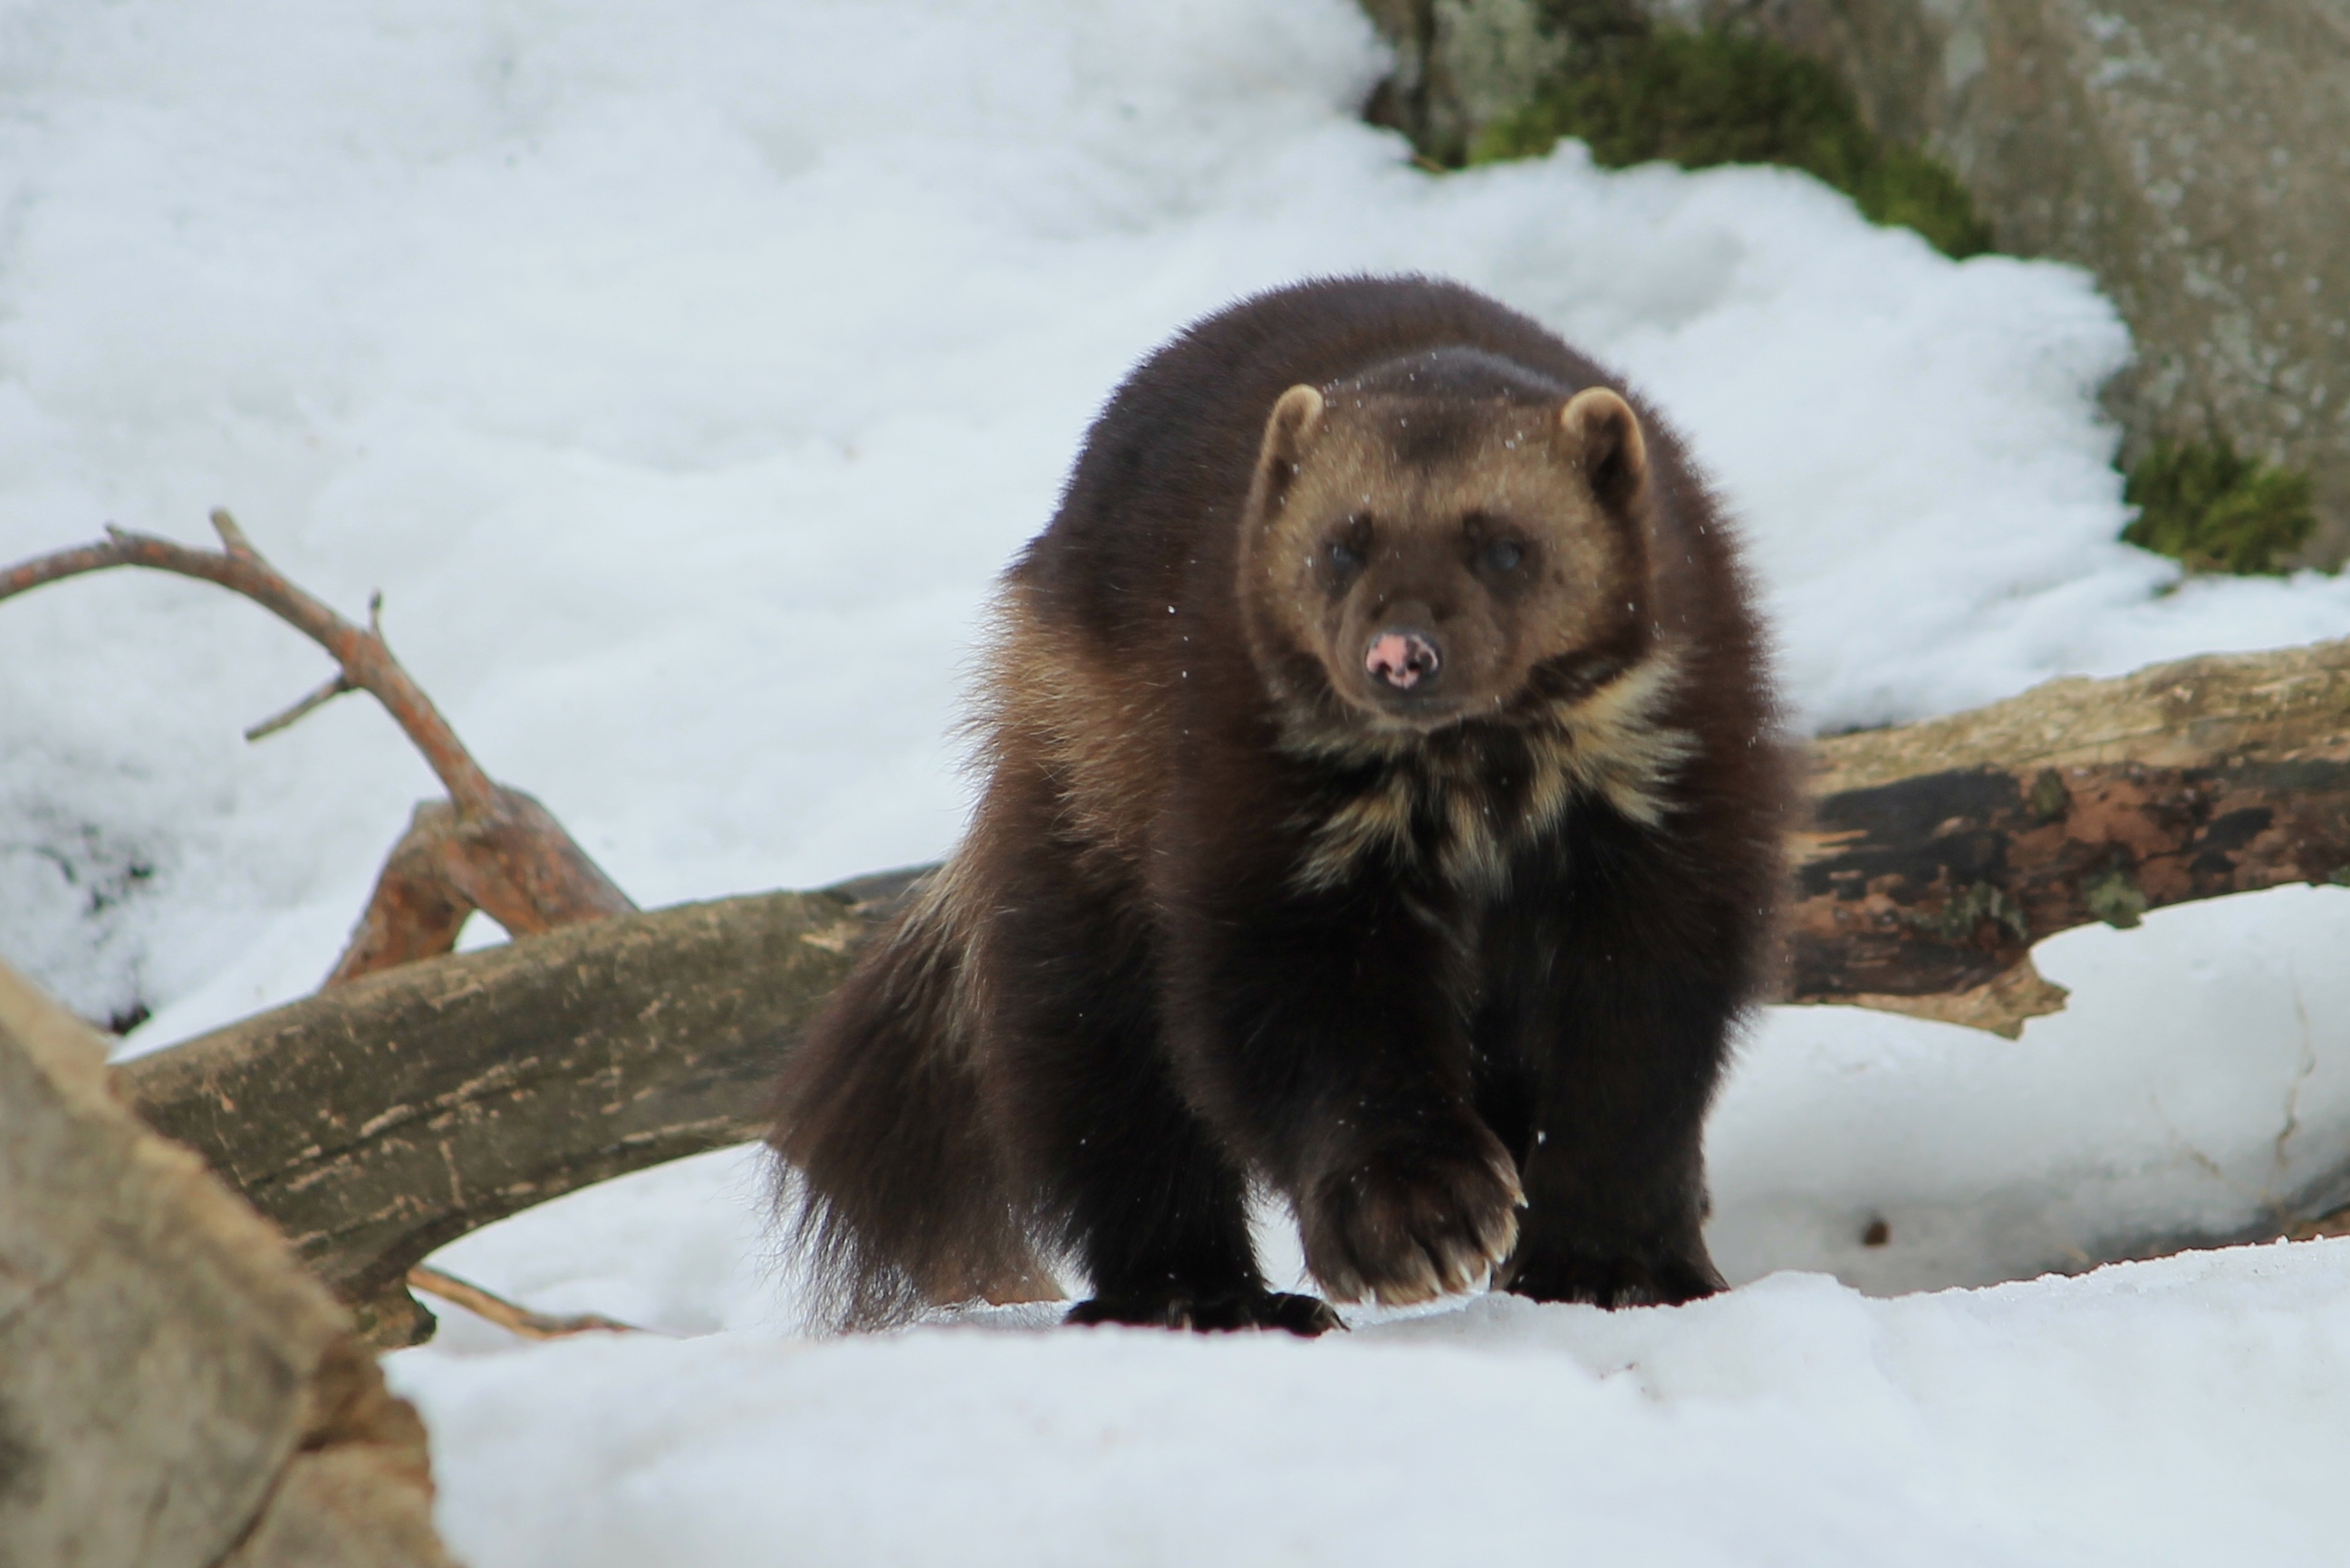 Wolverine walking in the snow near a log